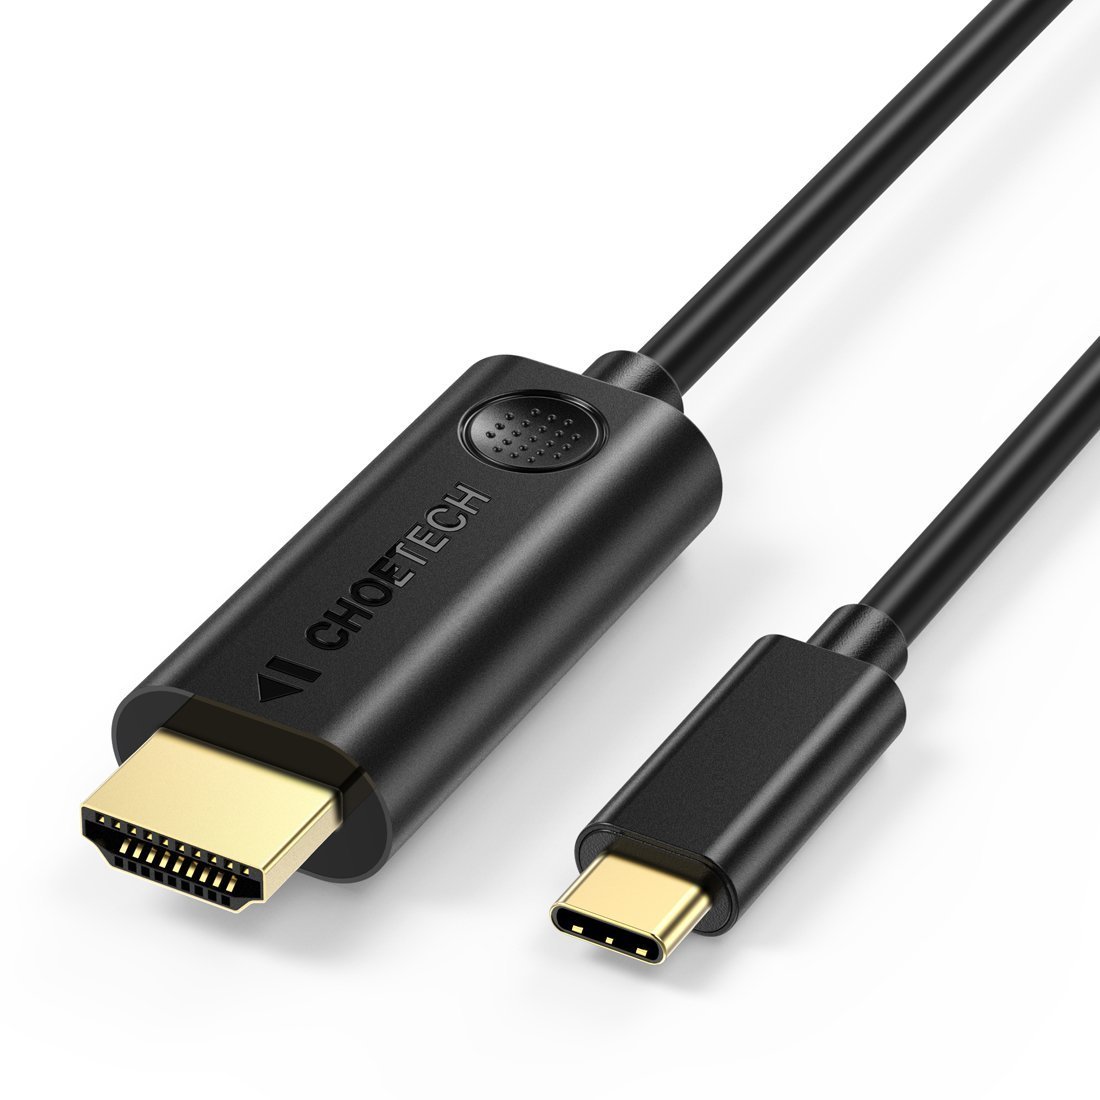 CHOETECH Cable USB C a HDMI (1.8m) Cable USB 3.1 Tipo C a HDMI (Thunderbolt 3 compatibles) para 2017/2016 MacBook Pro, iMac 2017, Galaxy Note 8/S8/S8 Plus, Huawei Mate 10 Pro/Huawei Mate 10